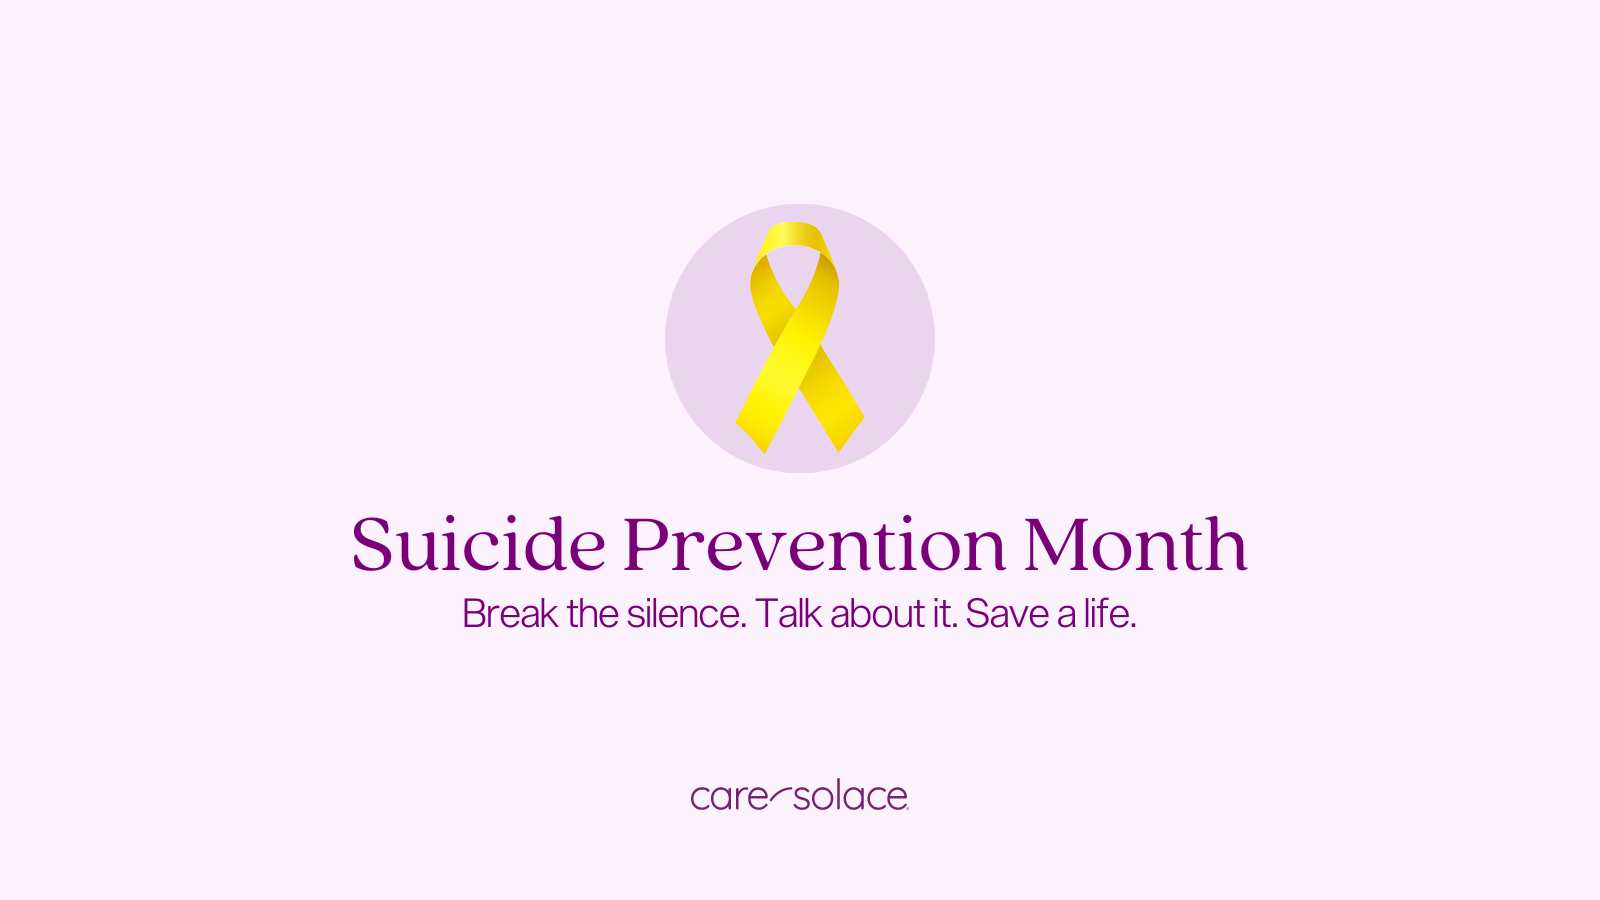 Care Solice Suicide Prevention Month Break the silence. Talk about it. Save a life.